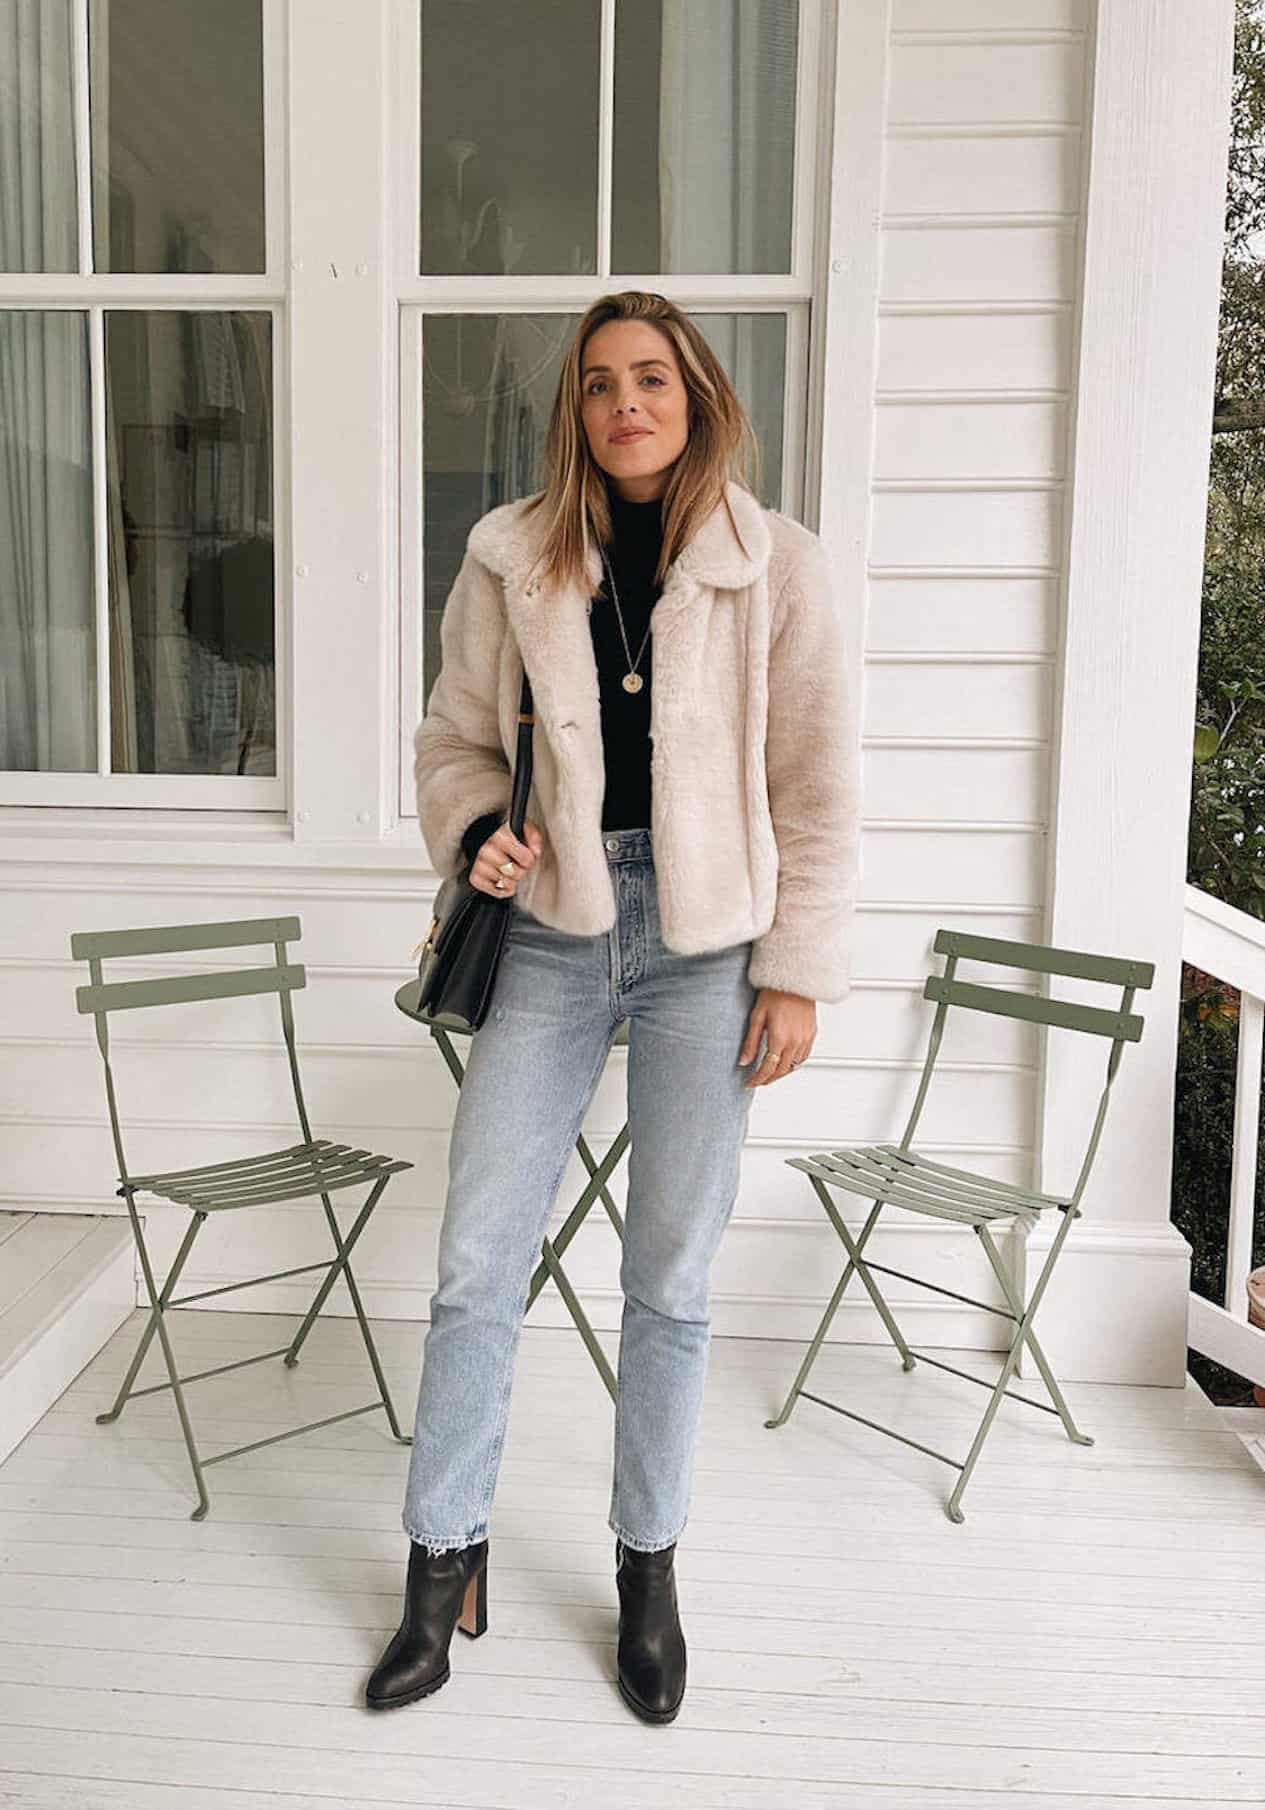 Woman wearing jeans, black booties, a black sweater and a white faux fur jacket.